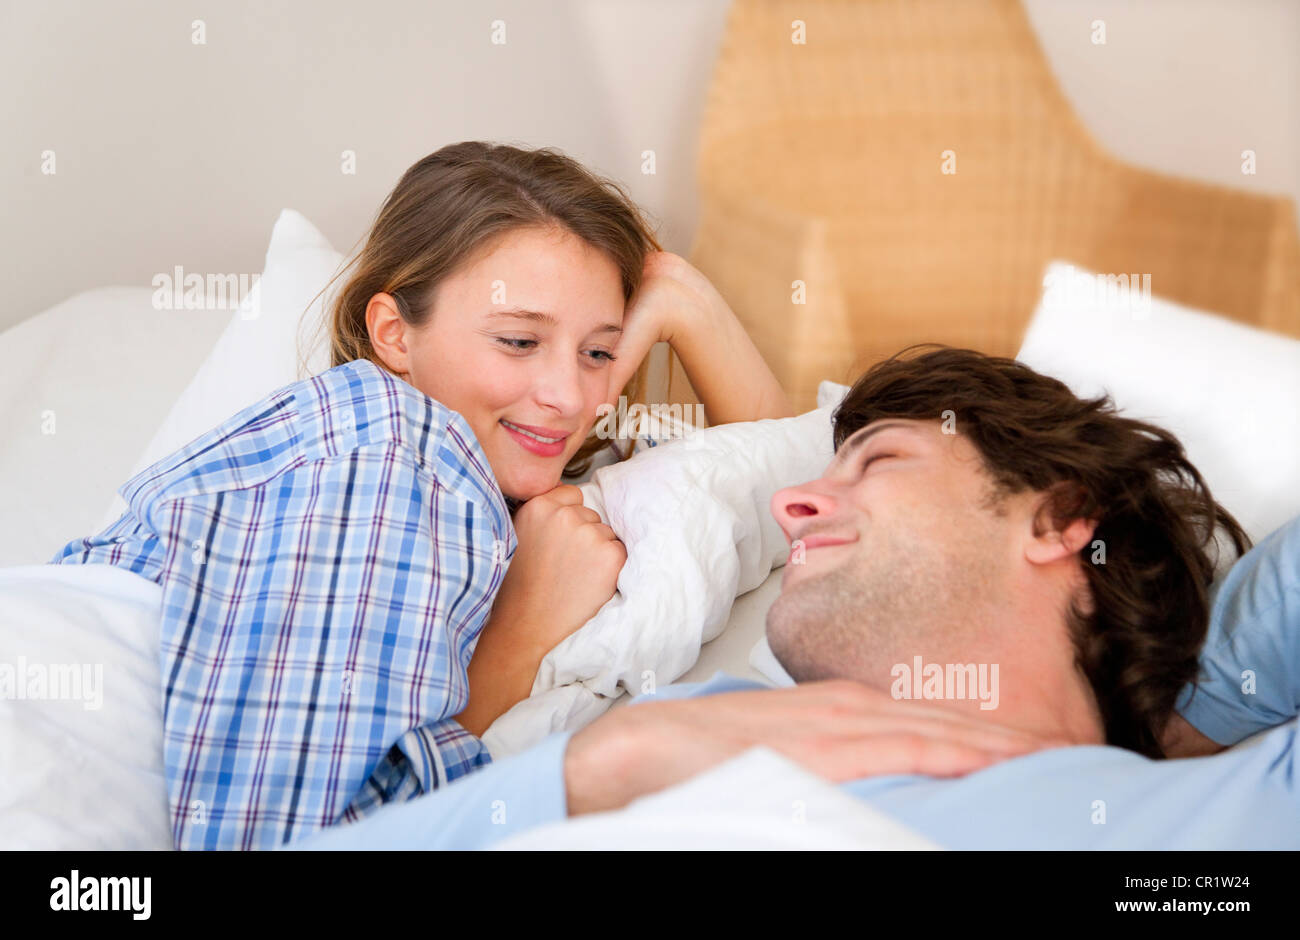 Smiling couple relaxing in bed Stock Photo